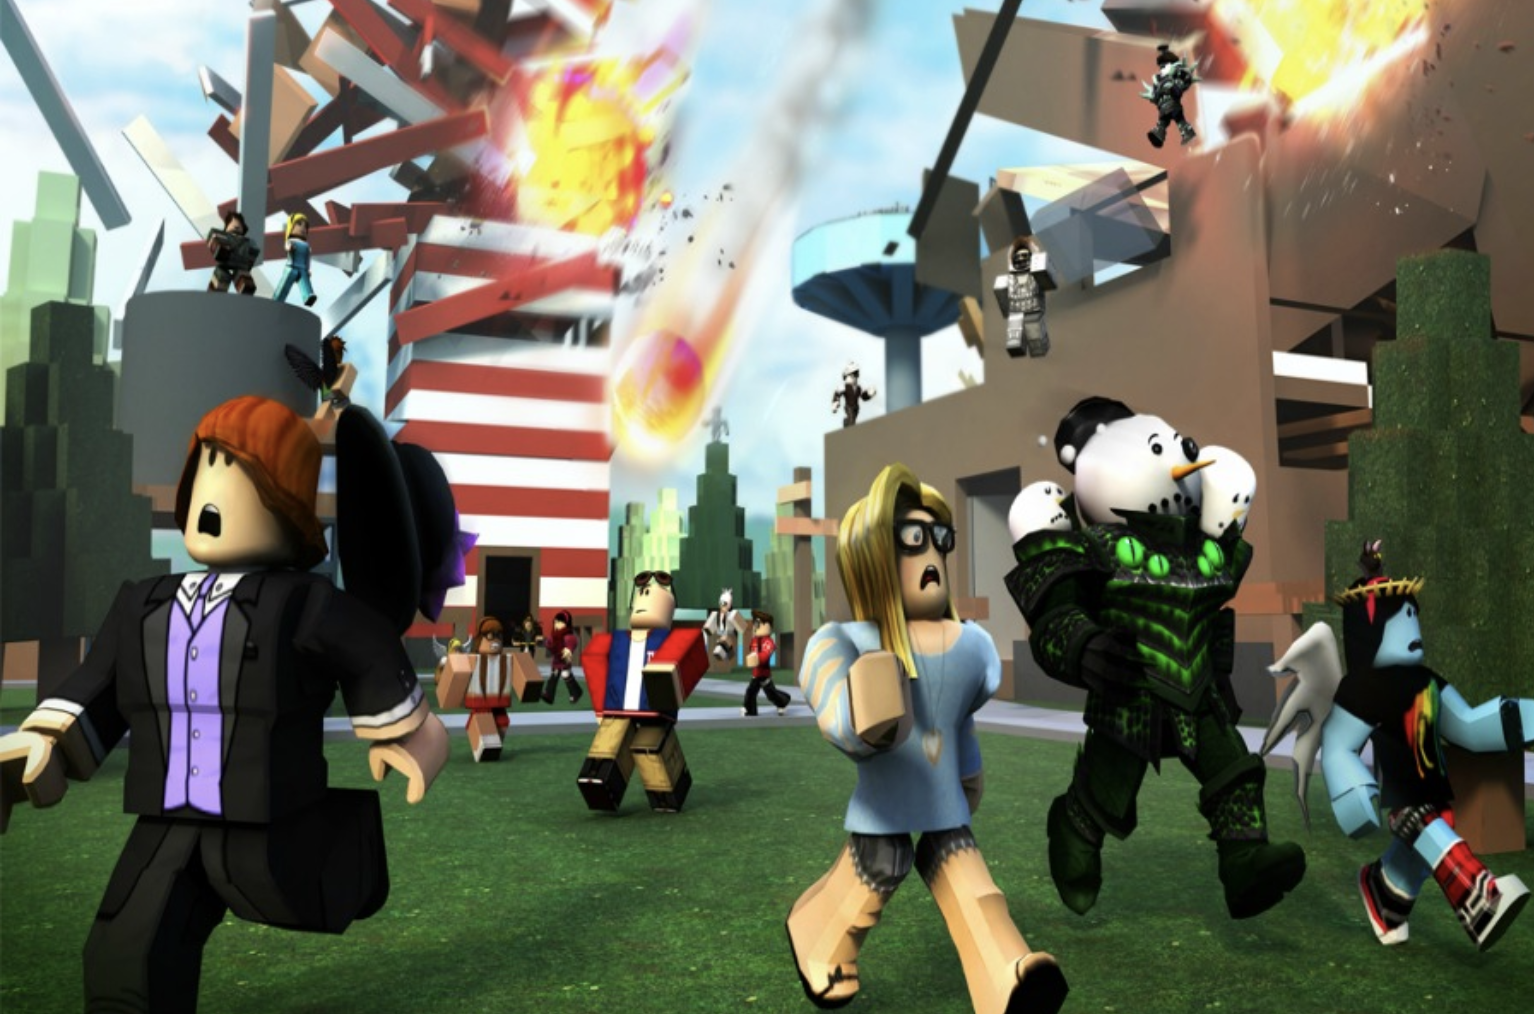 RTC on X: Most of Roblox's side accounts on Twitter will now be posting on  the main Roblox account now.  / X